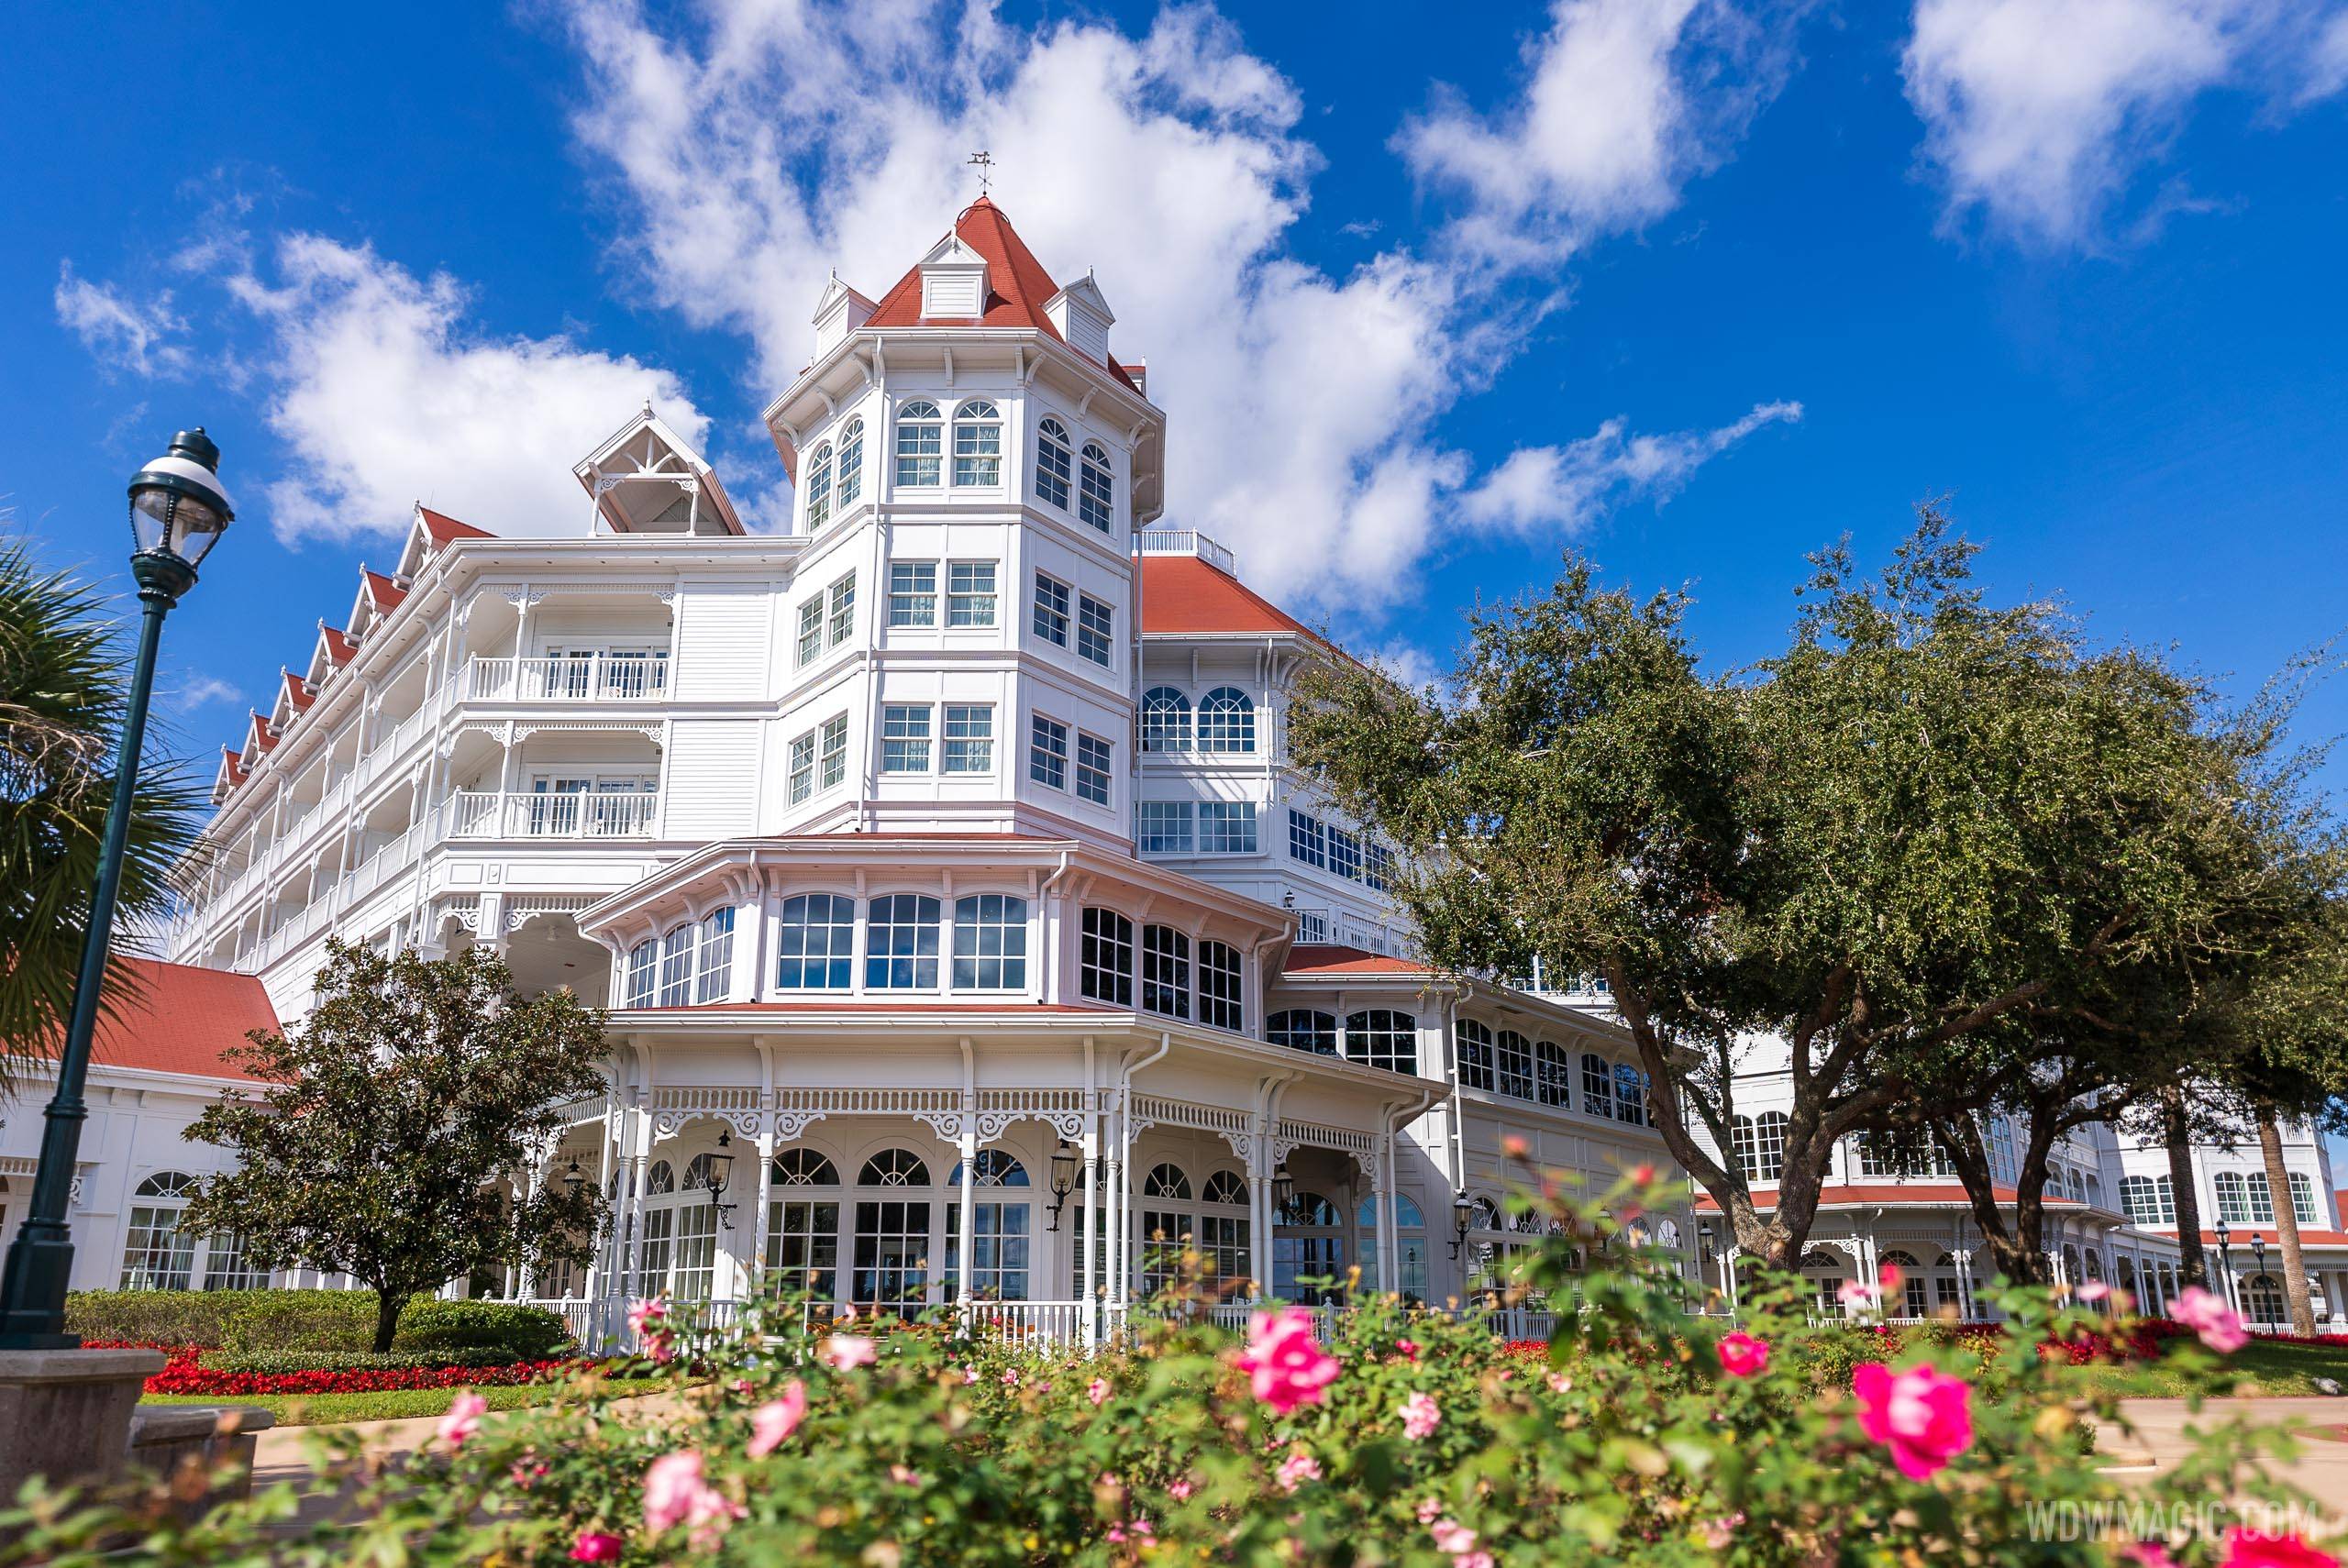 Some Grand Floridian Resort restaurants closed this week